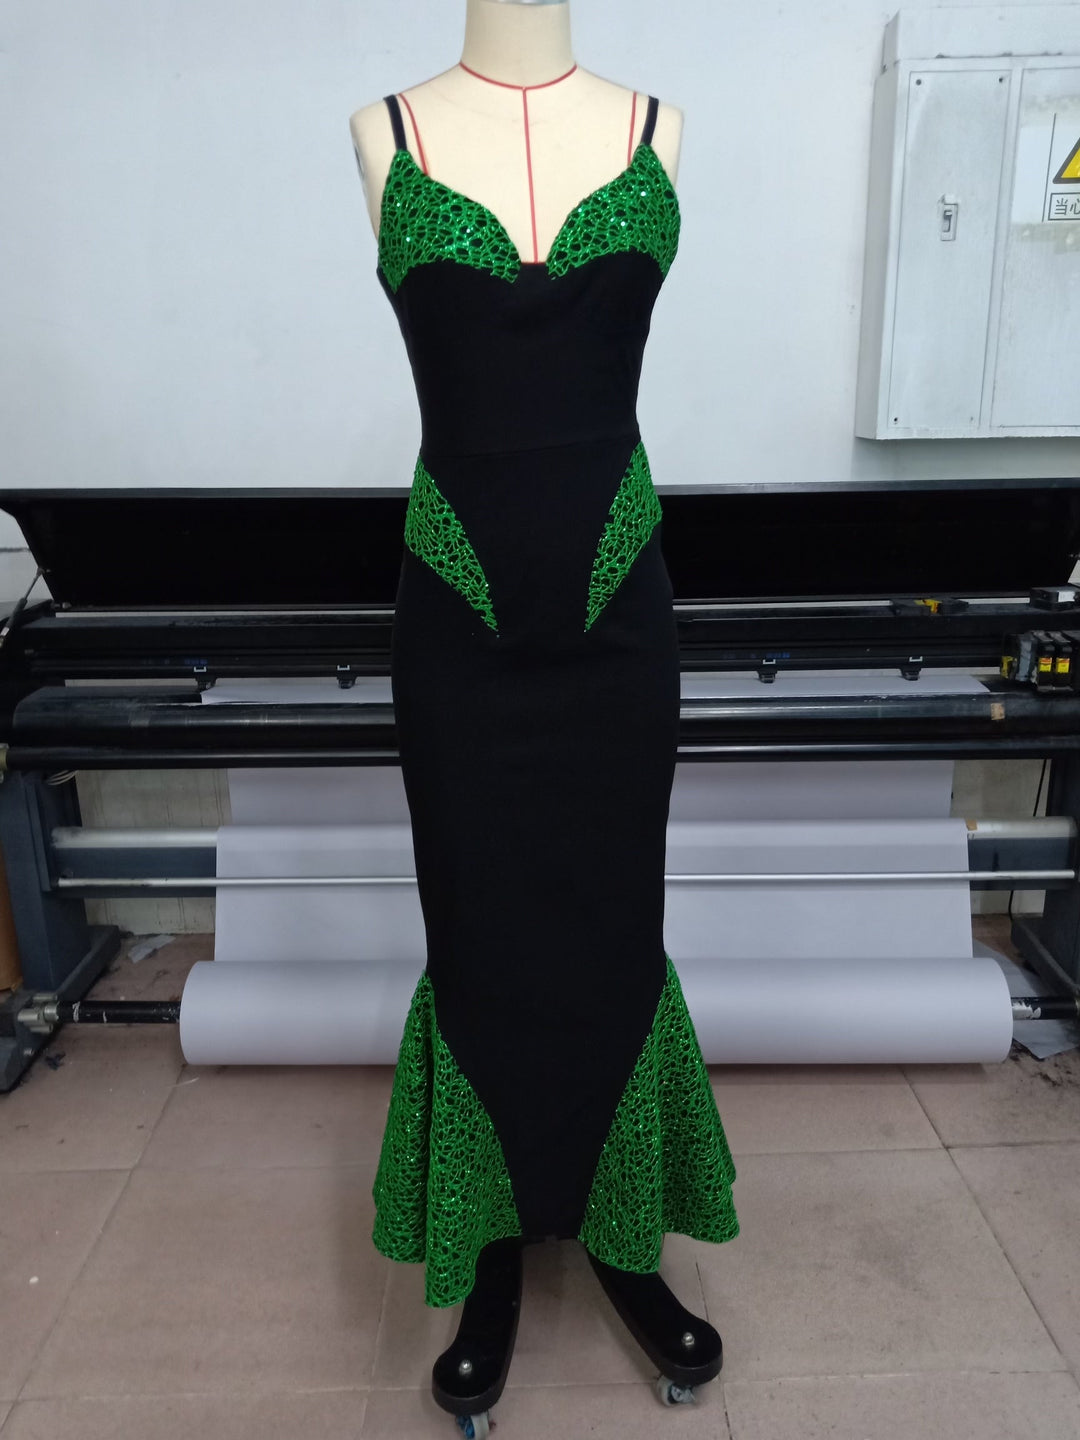 Creature Sparkle Dress in Green